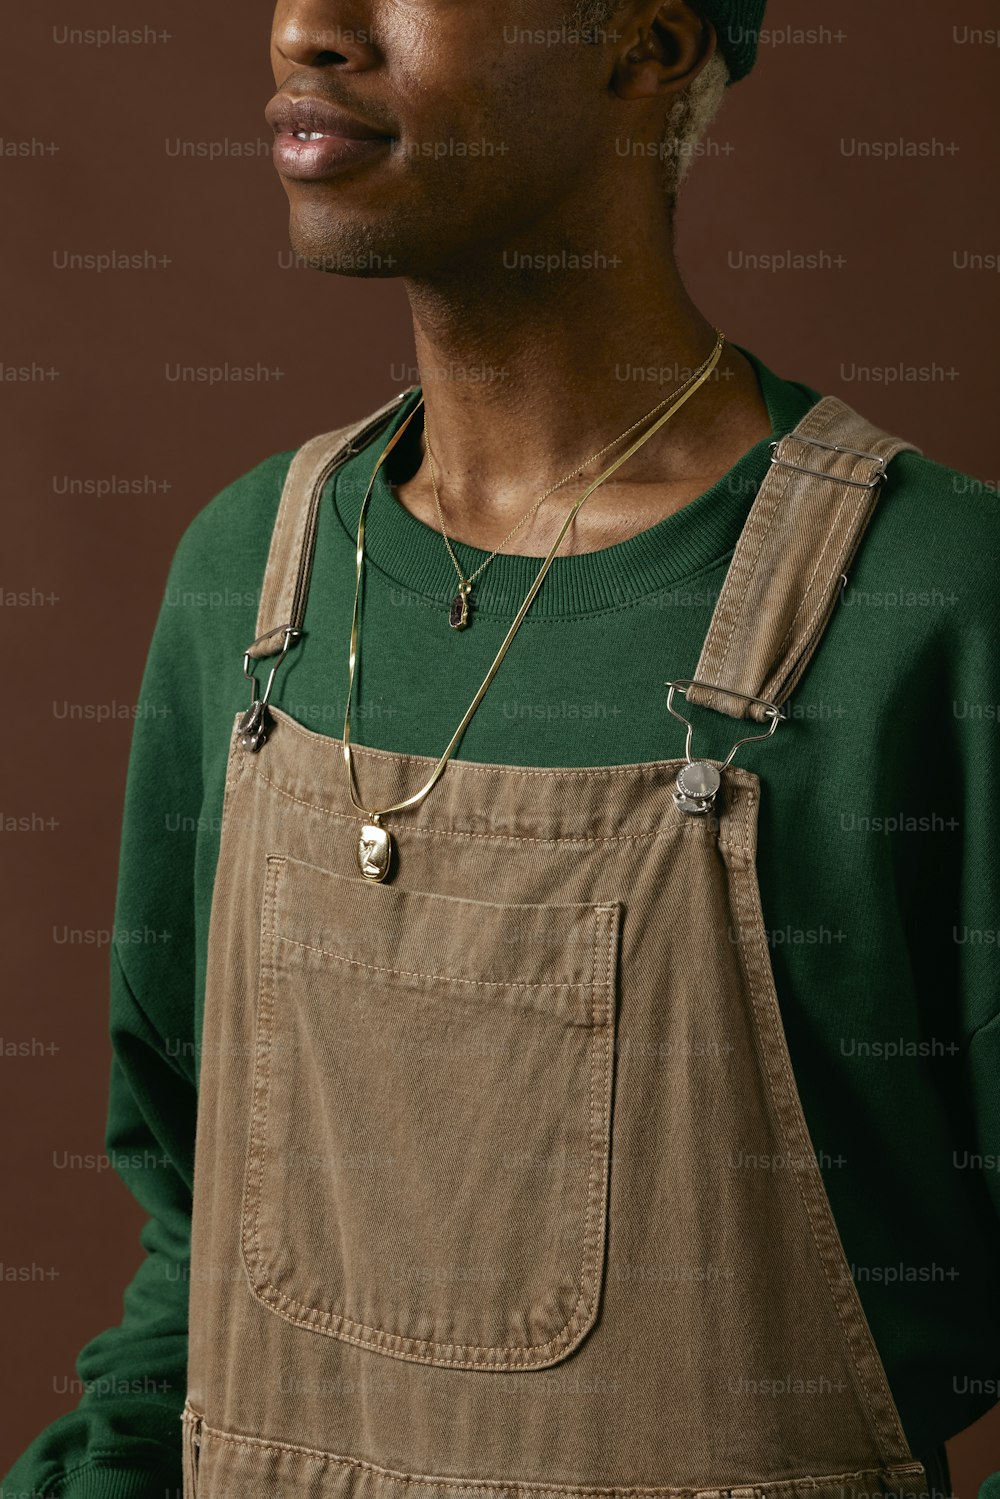 a man wearing a green shirt and brown overalls